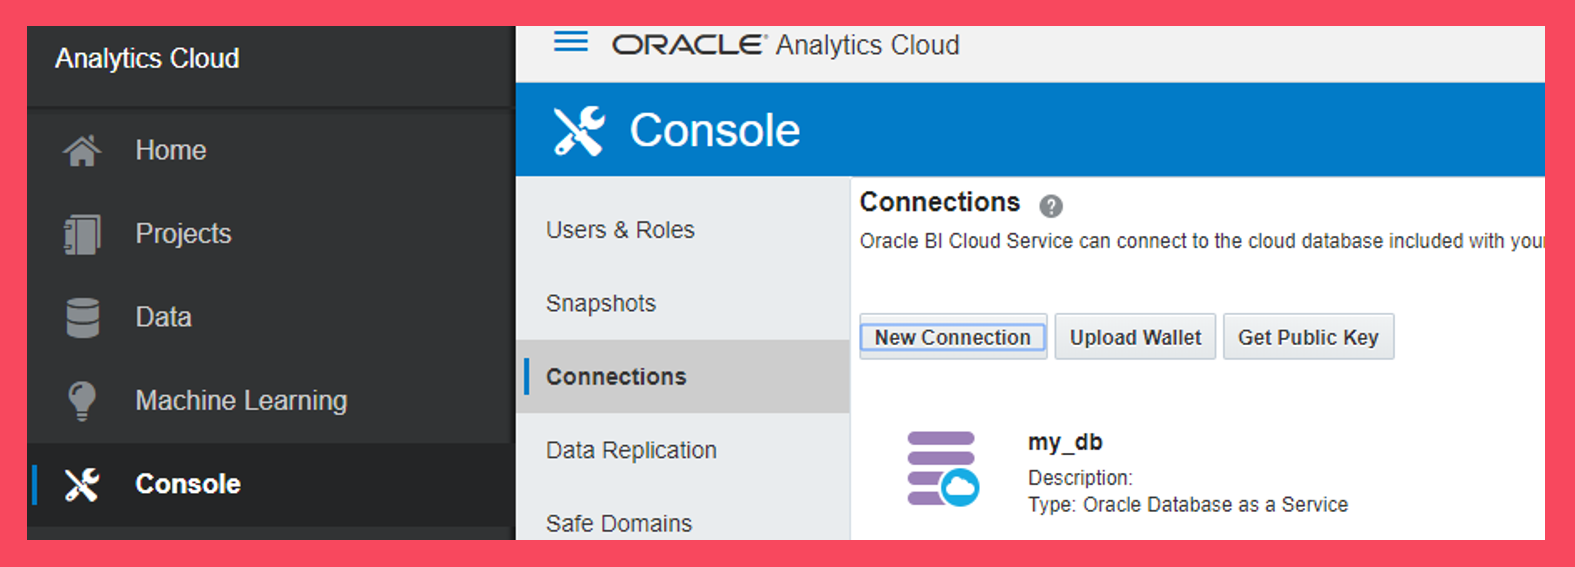 setting-up-oracle-analytics-cloud-step-4-oracle-analytics-cloud-create-a-data-source-3